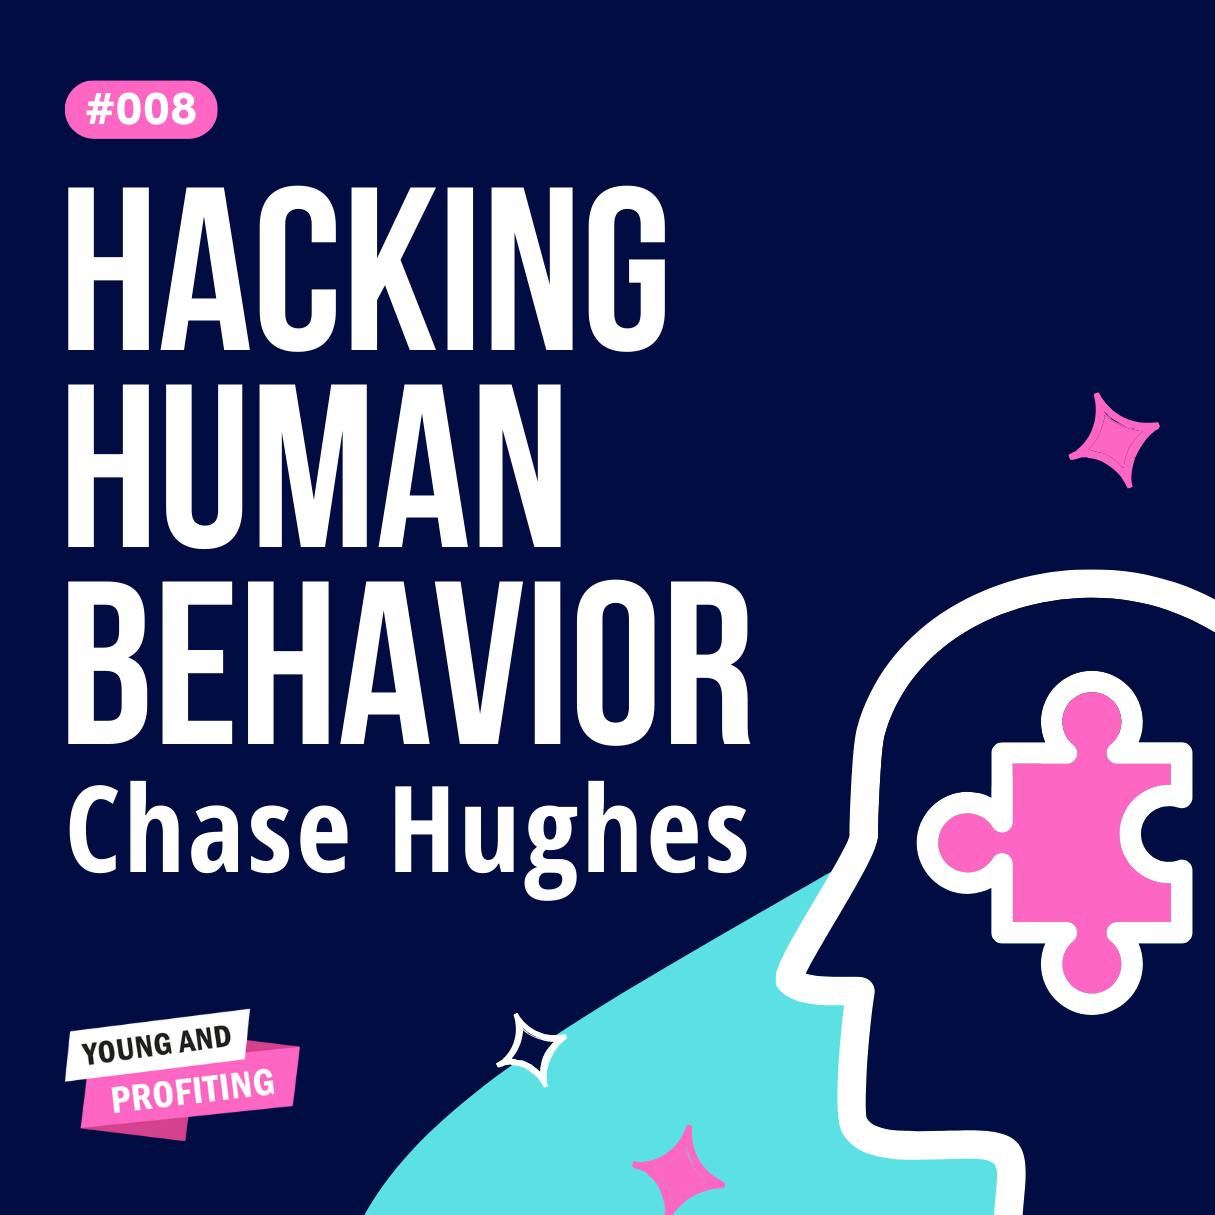 YAPClassic: Chase Hughes on Hacking Human Behavior, The Secrets to Gaining Influence